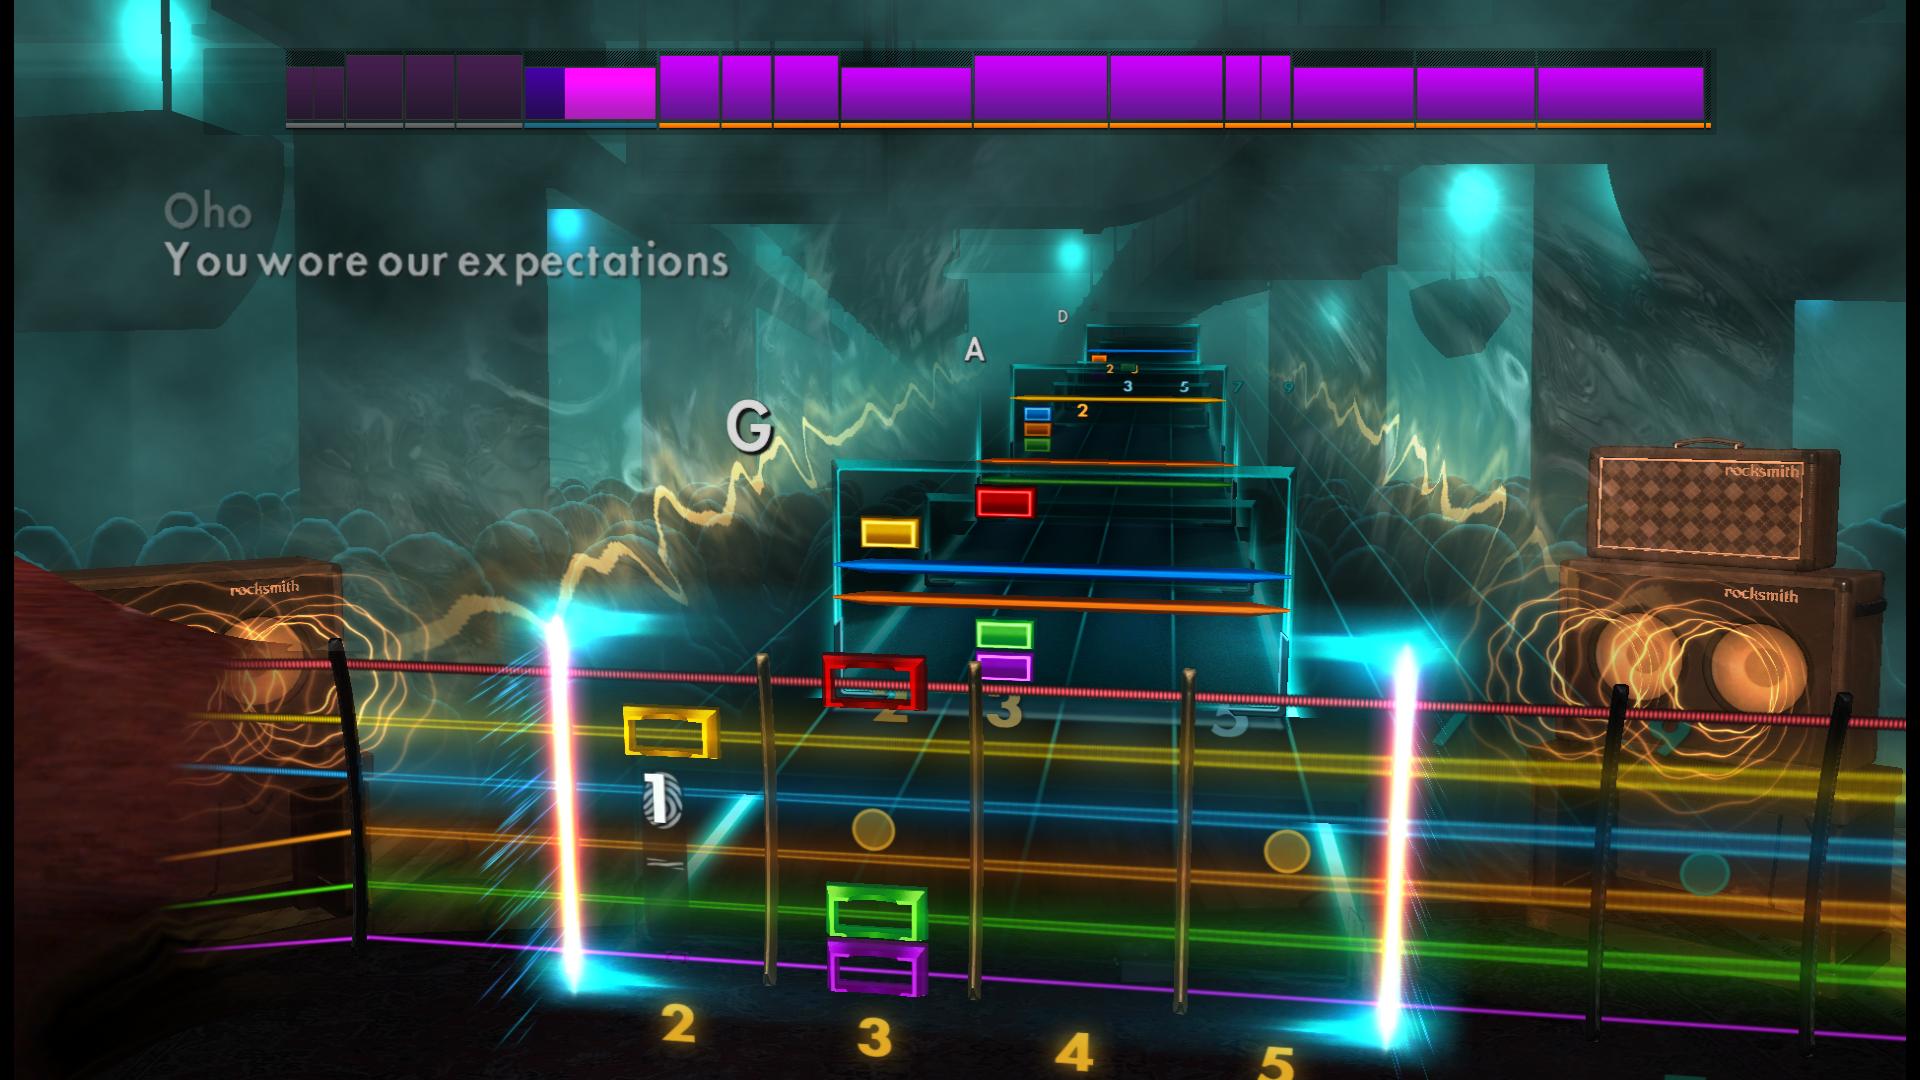 Rocksmith® 2014 – R.E.M. Song Pack on Steam